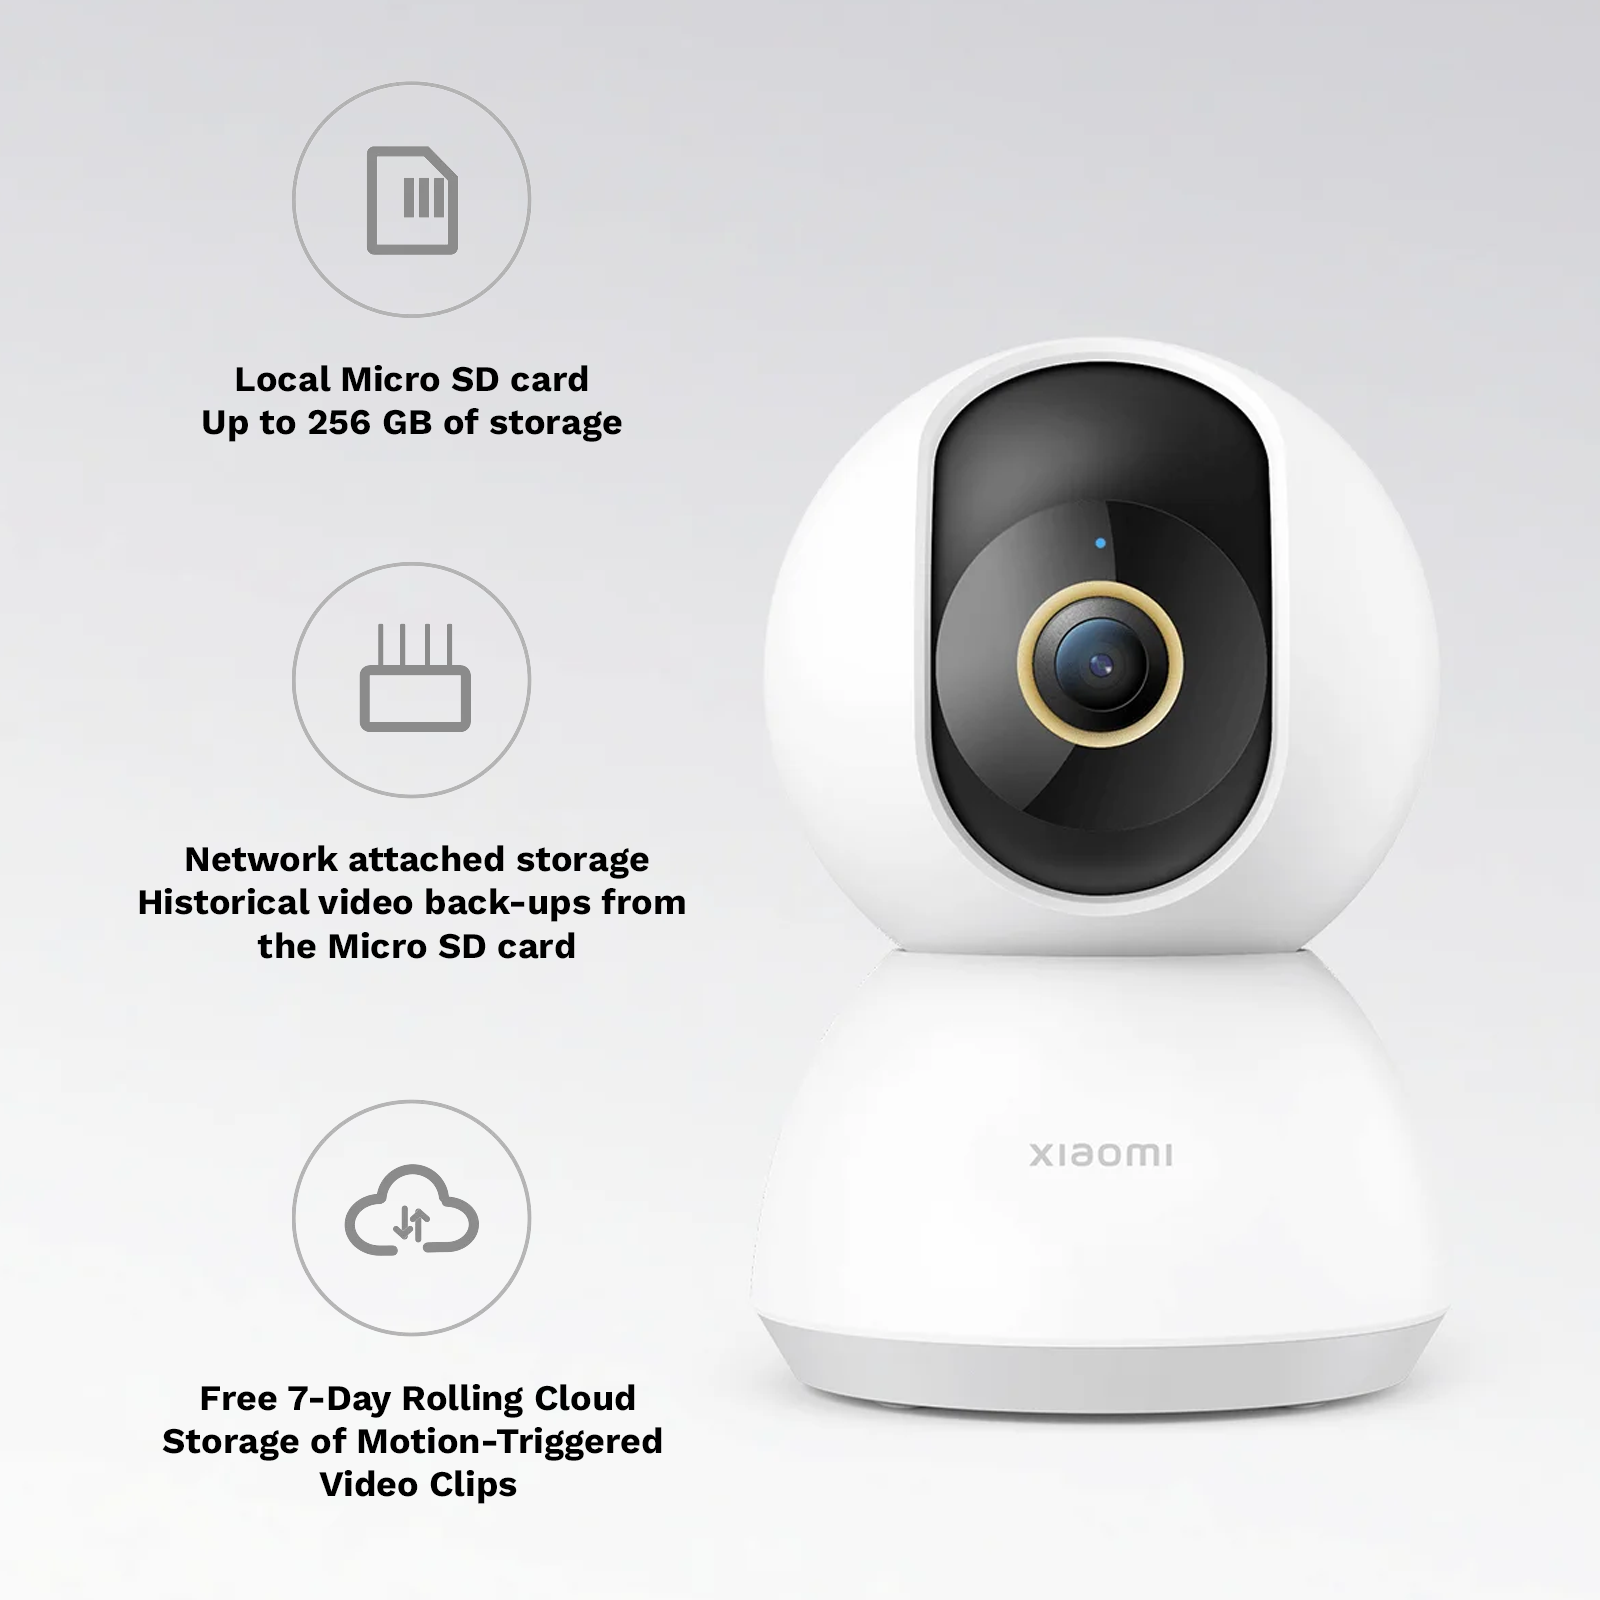 Xiaomi Smart Camera C300, 2K Clarity, 360° Vision, AI Human Detection, F1.4  Large Aperture and 6P Lens, Enhanced Color Night Vision in Low Light, Full